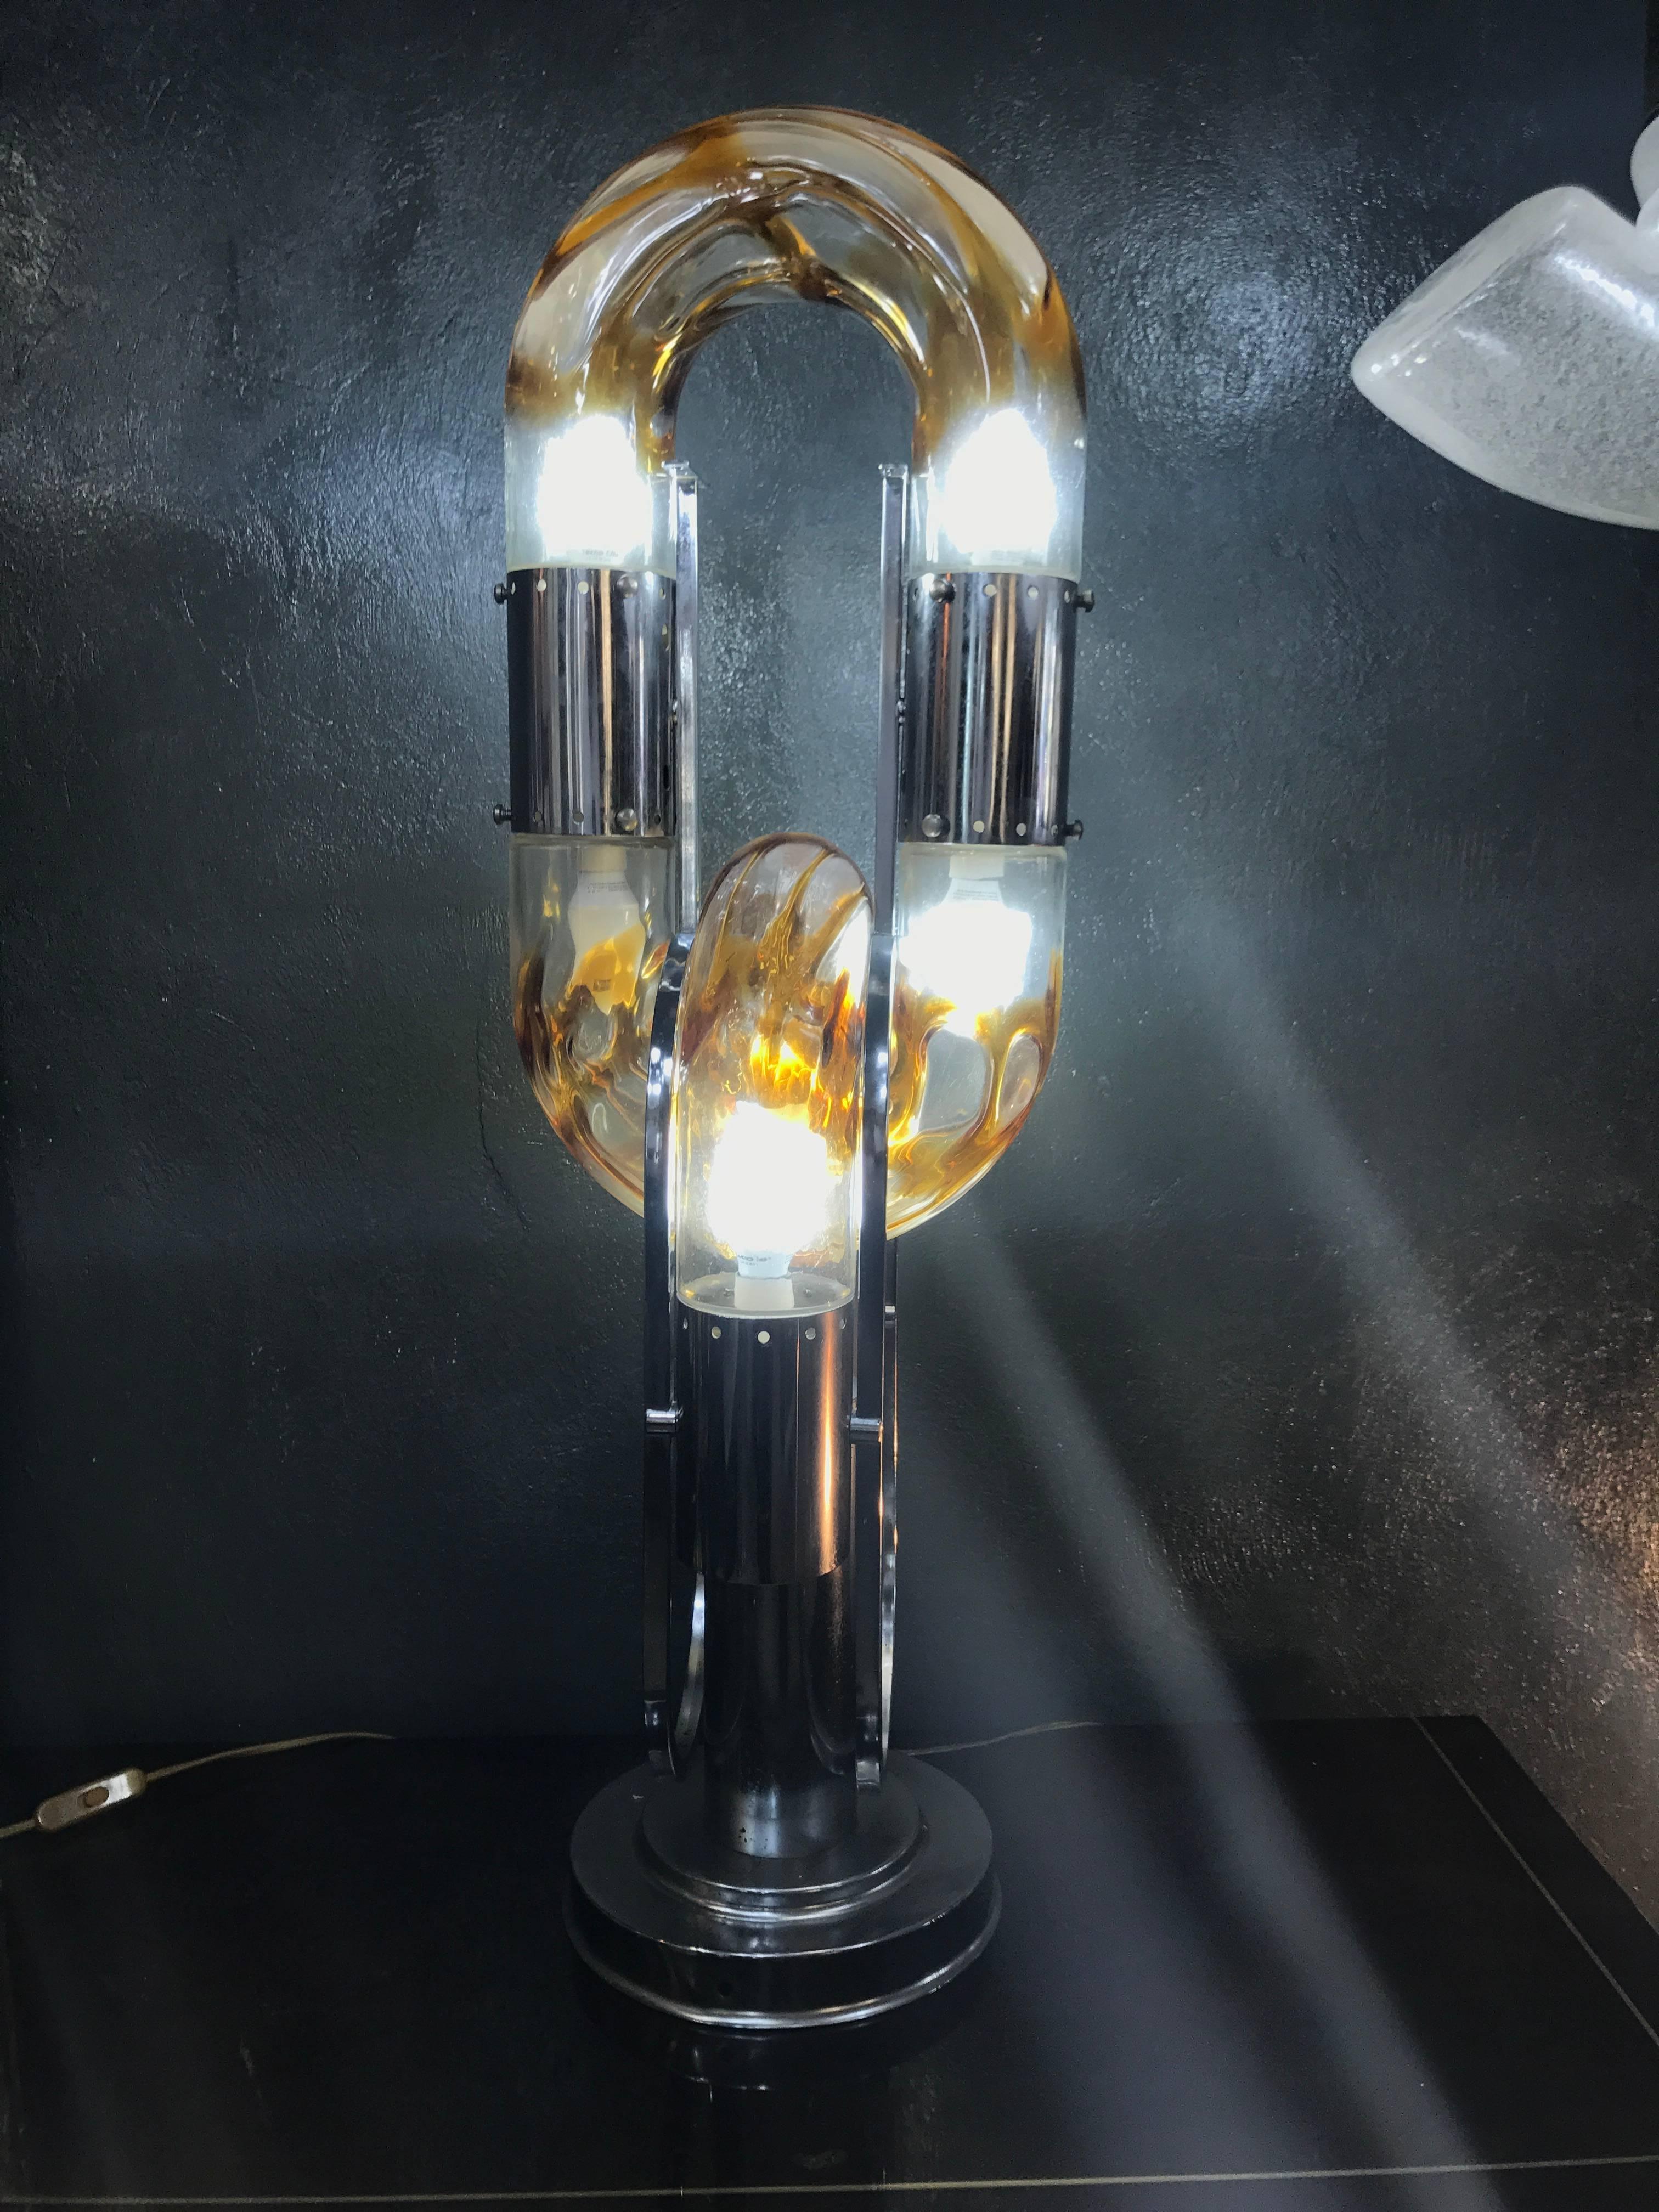 Space Age six-light table lamp designed by Aldo Nason, circa 1970 in Murano clear and amber colored glass and chrome base.
It can also be converted into a chandelier if desired.